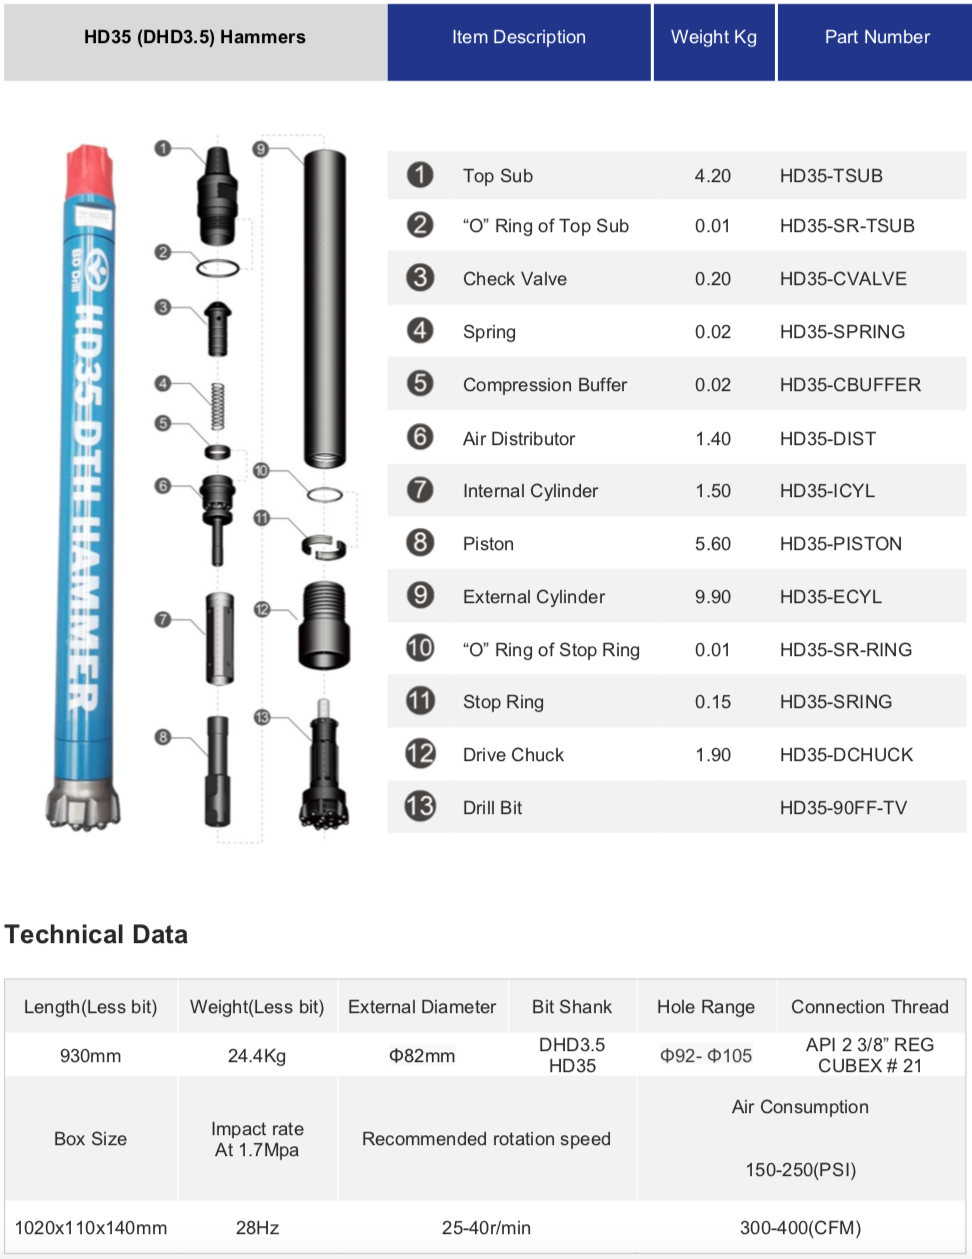 Black Diamond Drilling HD35 DTH Down the Hole Hammer schematic parts list and technical data